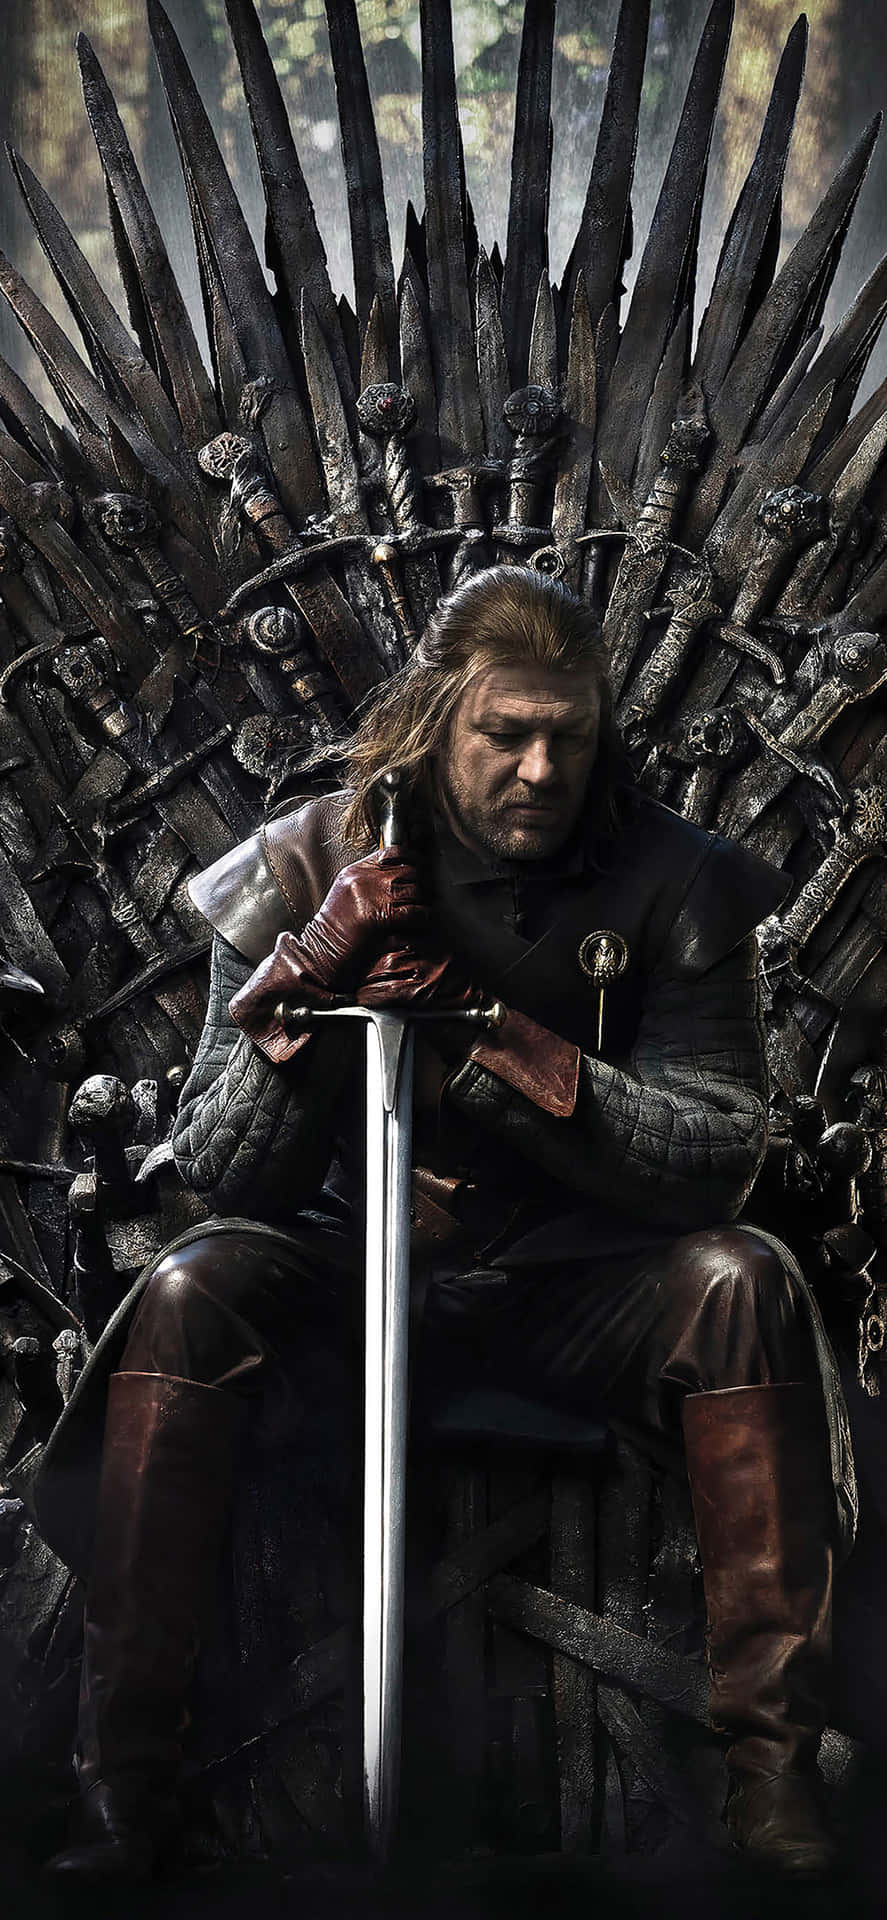 Get your exclusive Game Of Thrones Iphone wallpaper and become a part of the epic world! Wallpaper